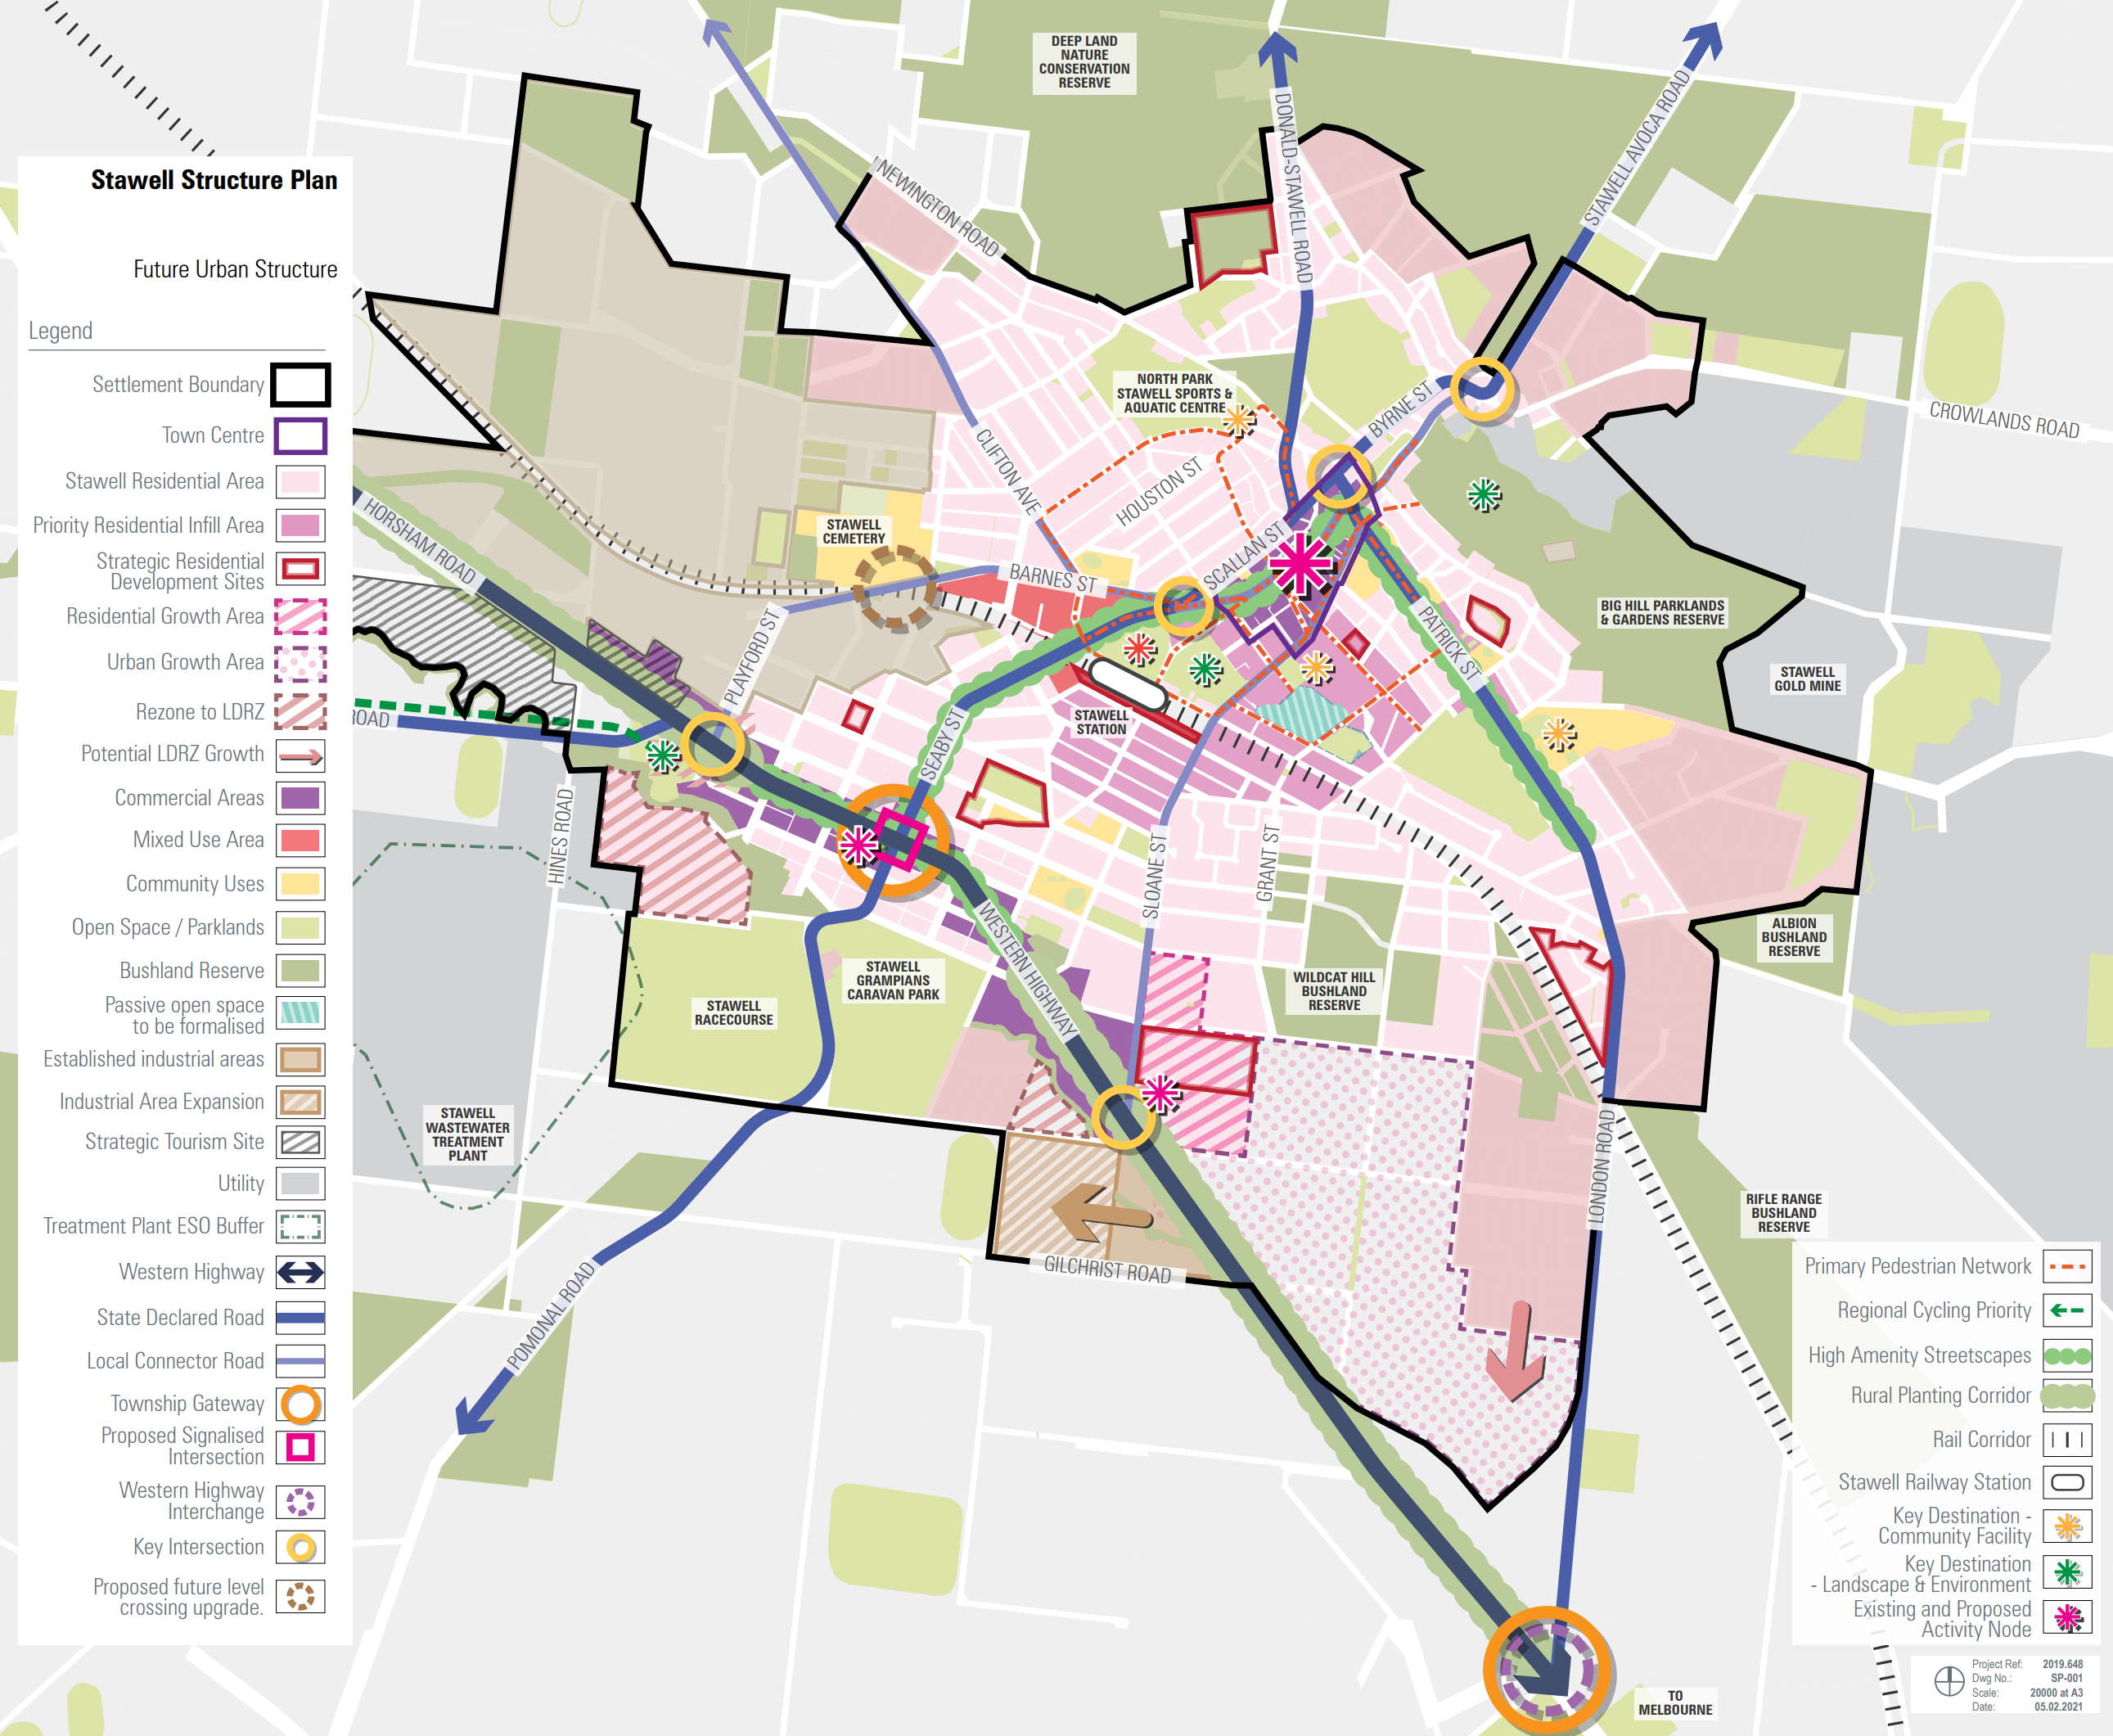 Stawell-Structure-Plan-2021-Future-Urban-Structure.png